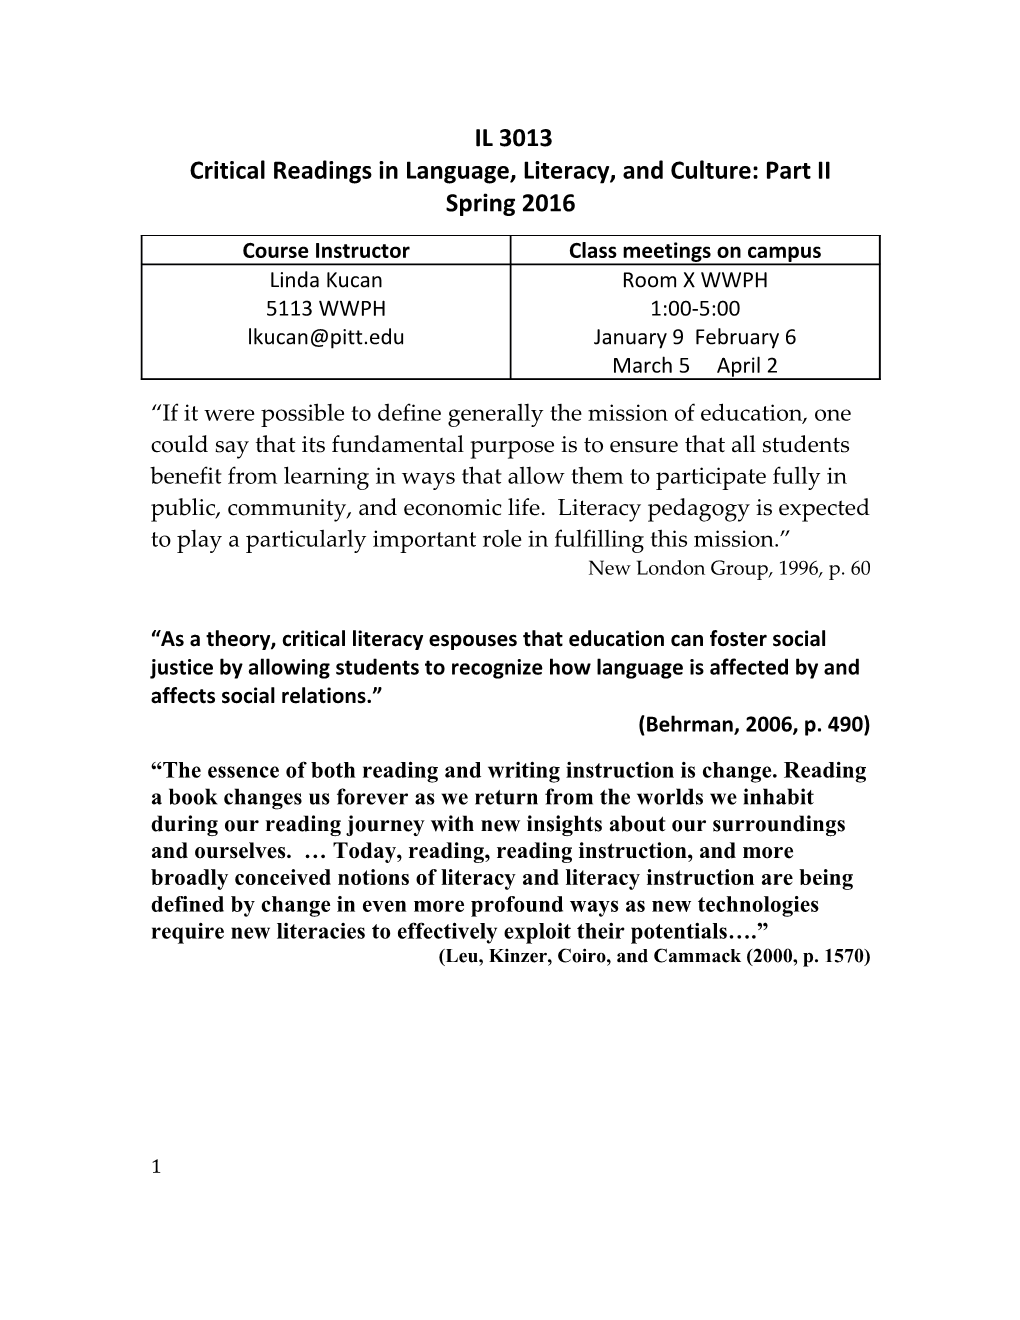 Critical Readings in Language, Literacy, and Culture: Part II